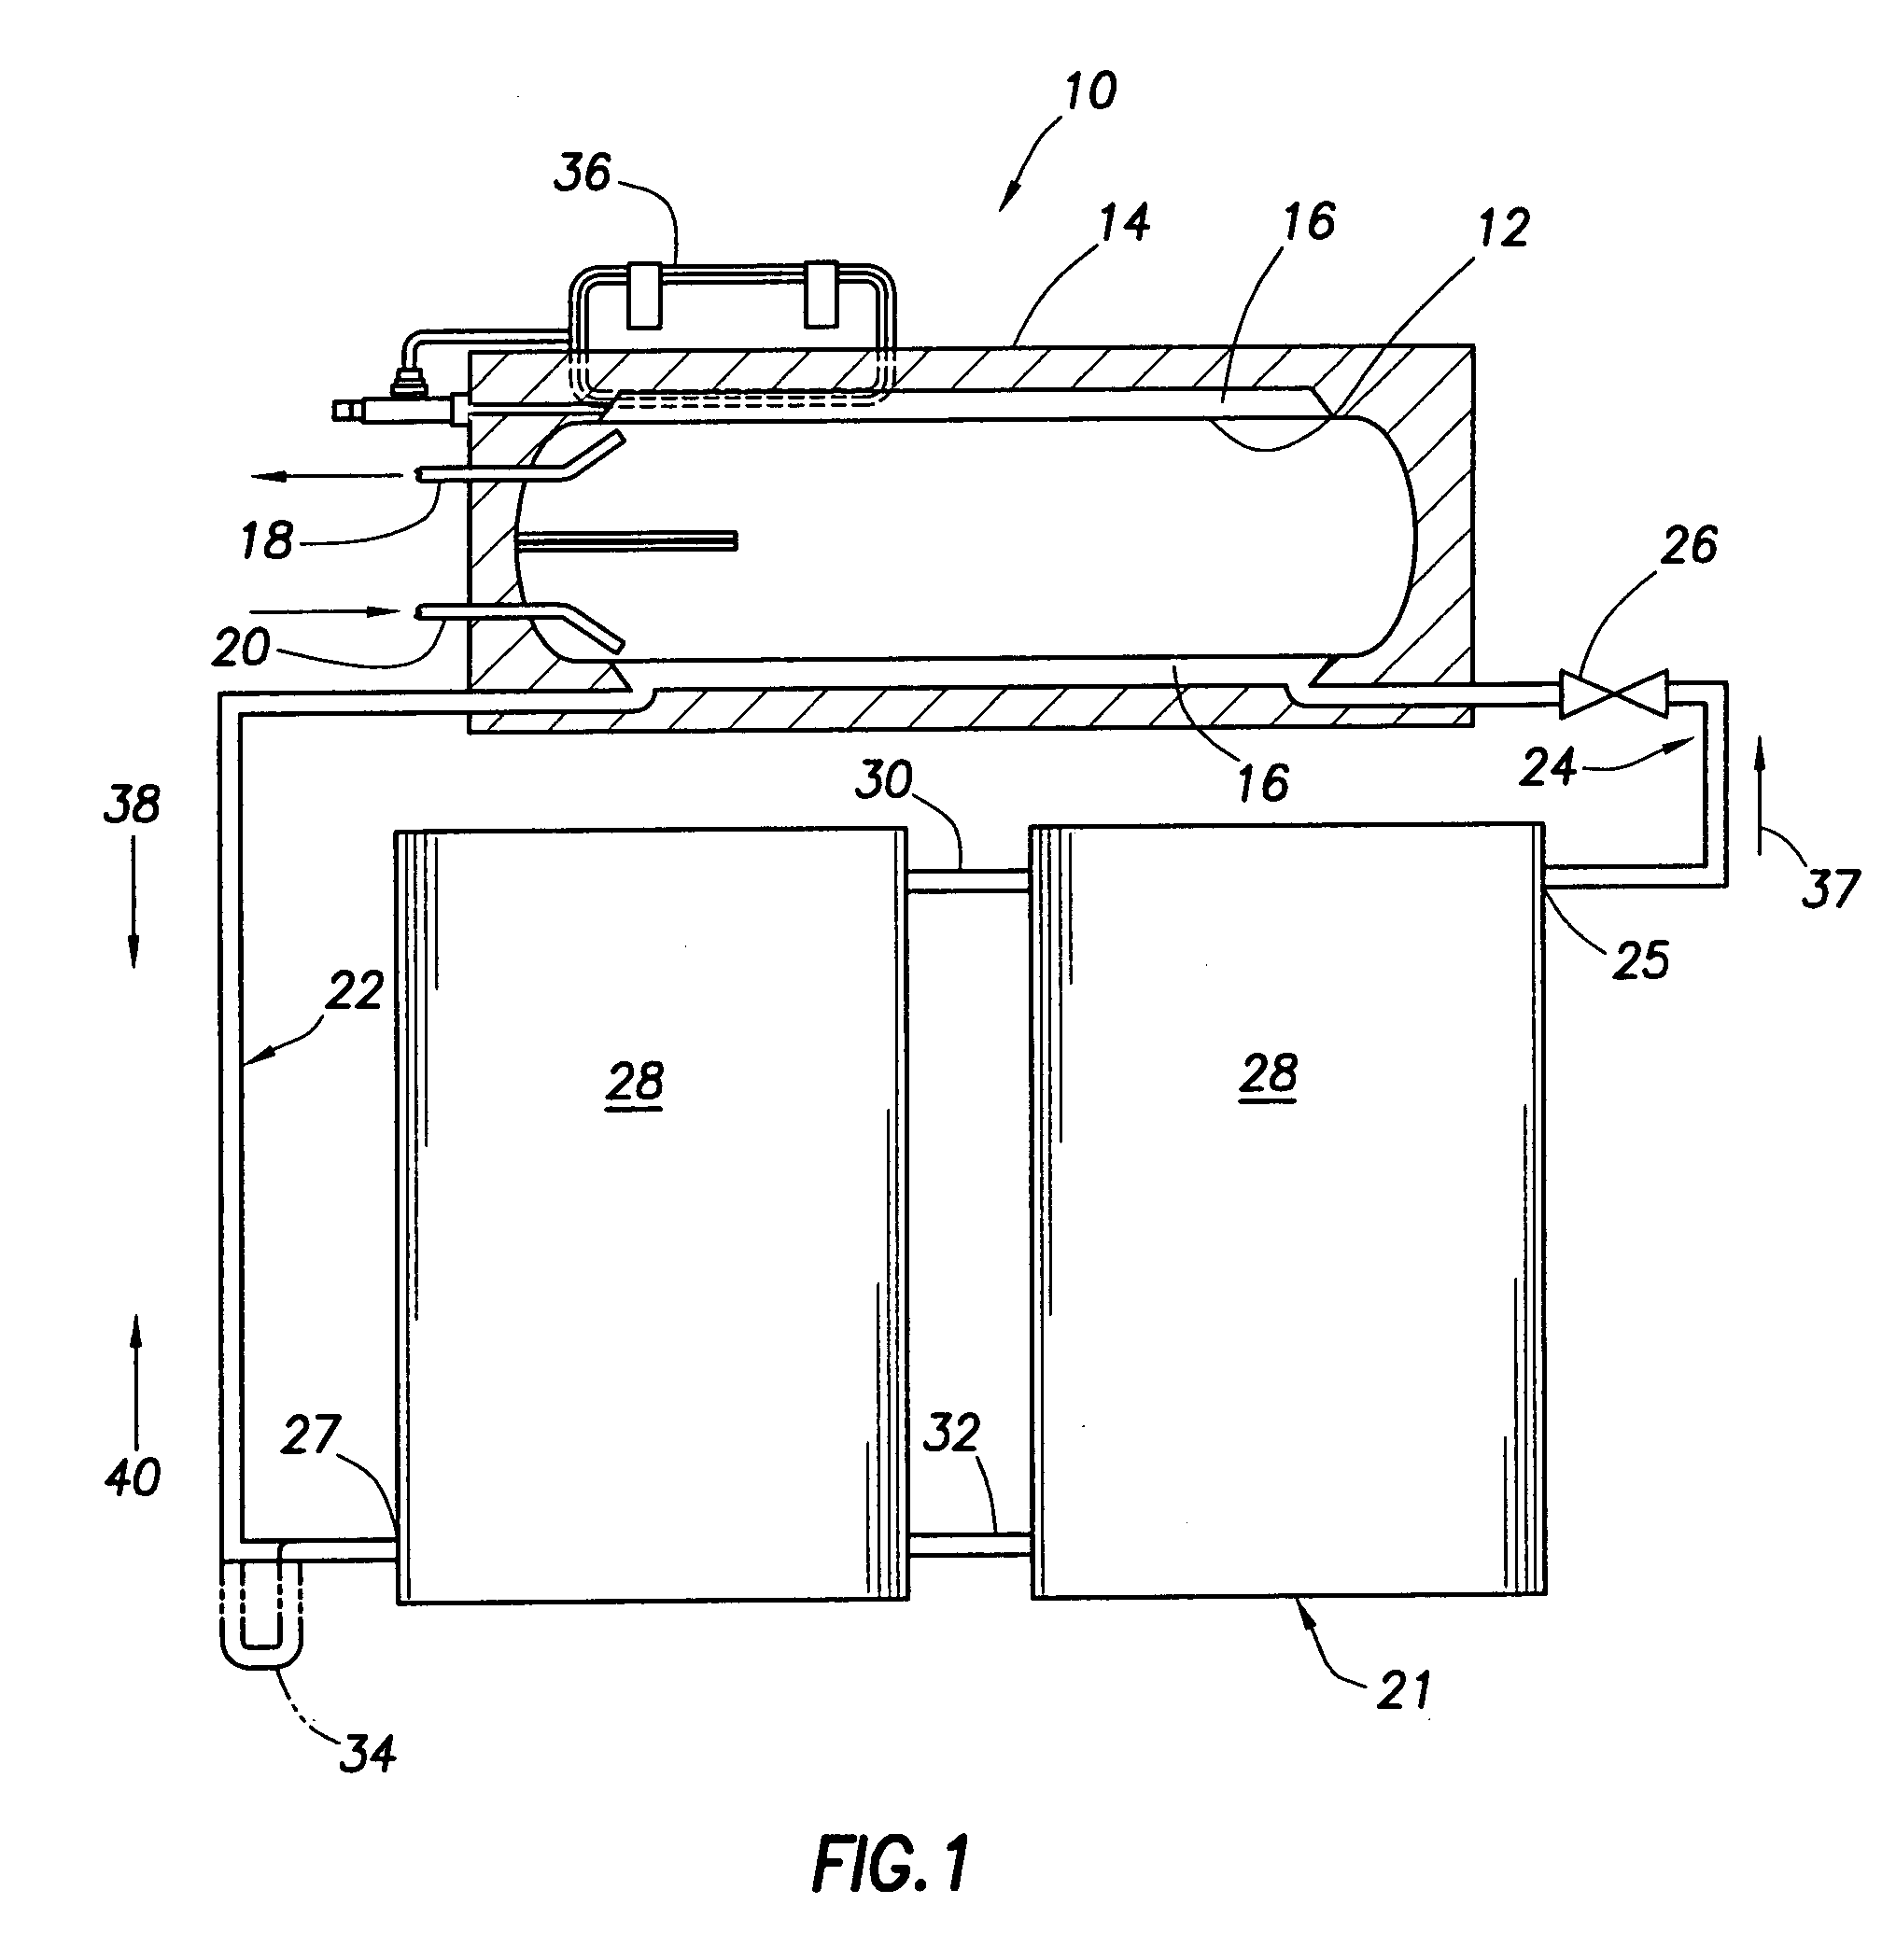 Protection system for a solar water heating system